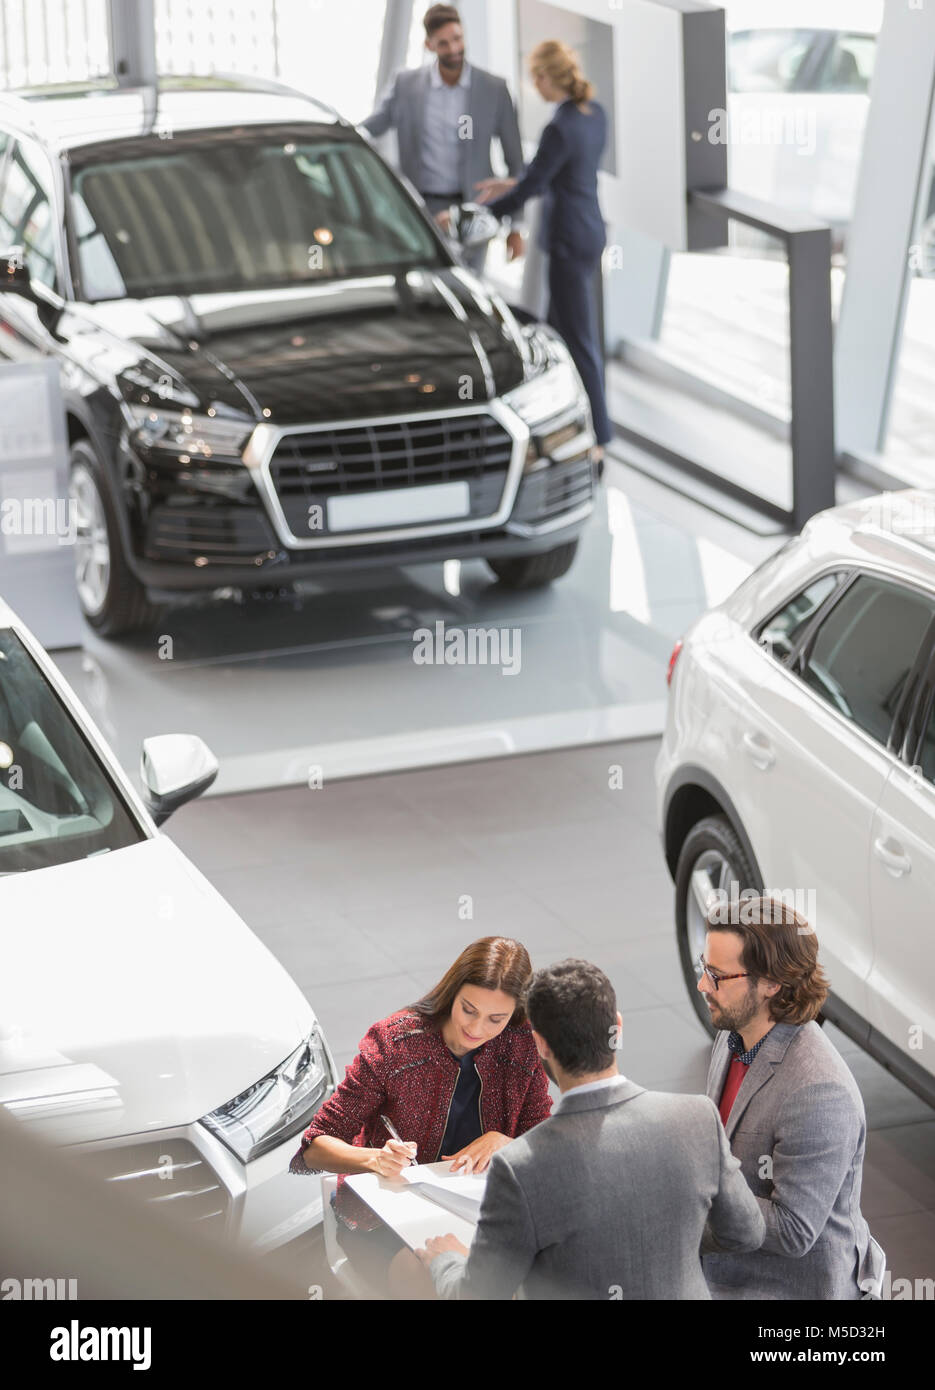 Car sales people and customers in car dealership showroom Stock Photo